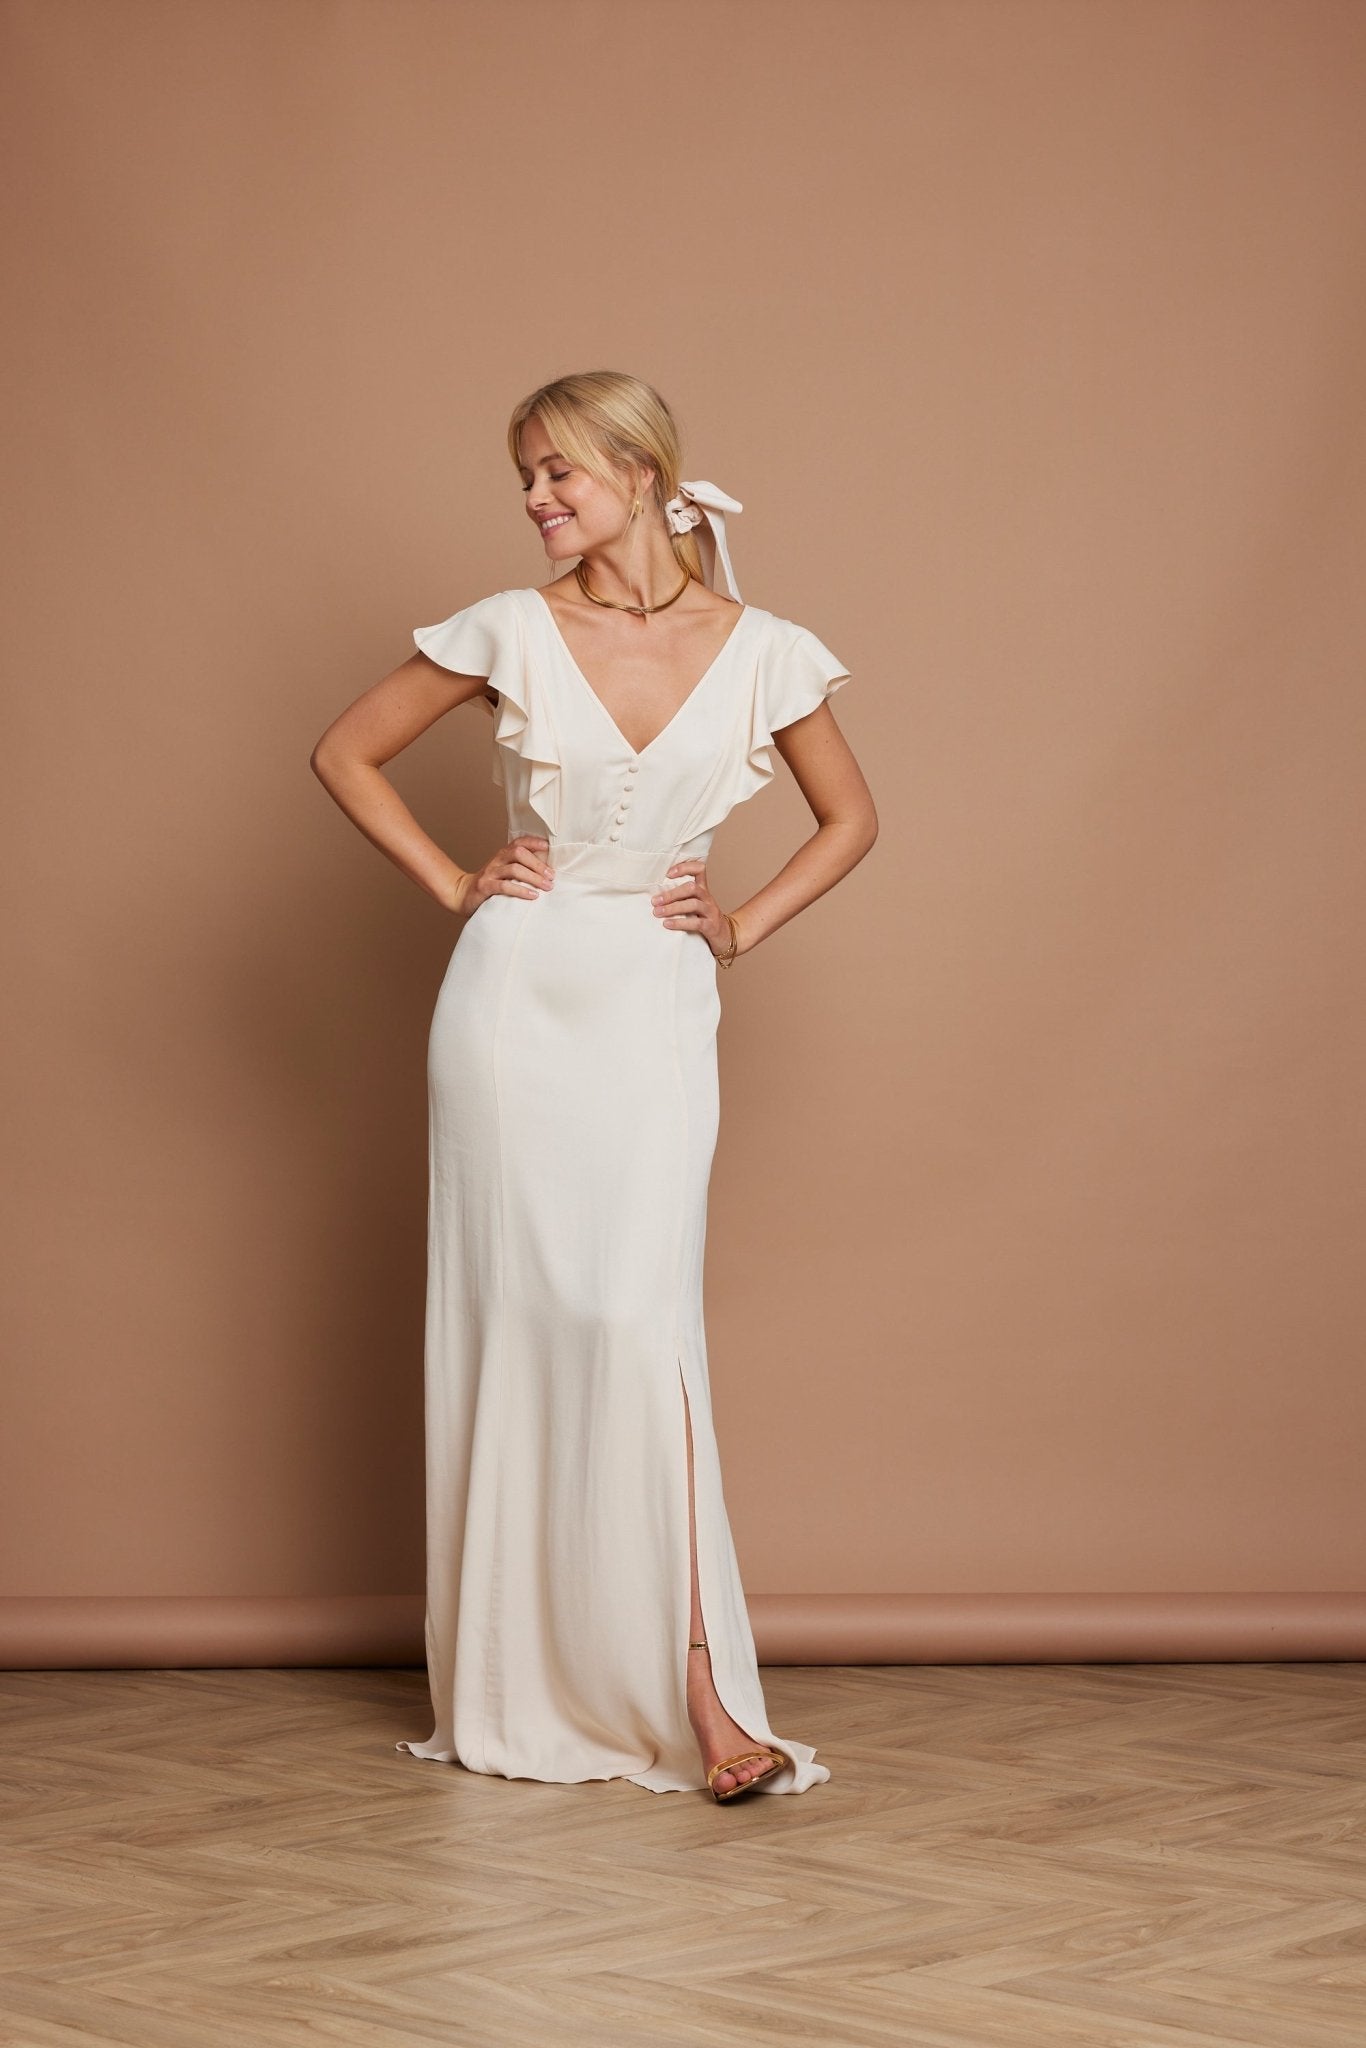 Elle Satin Open Back Dress - Champagne Ivory - Maids to Measure